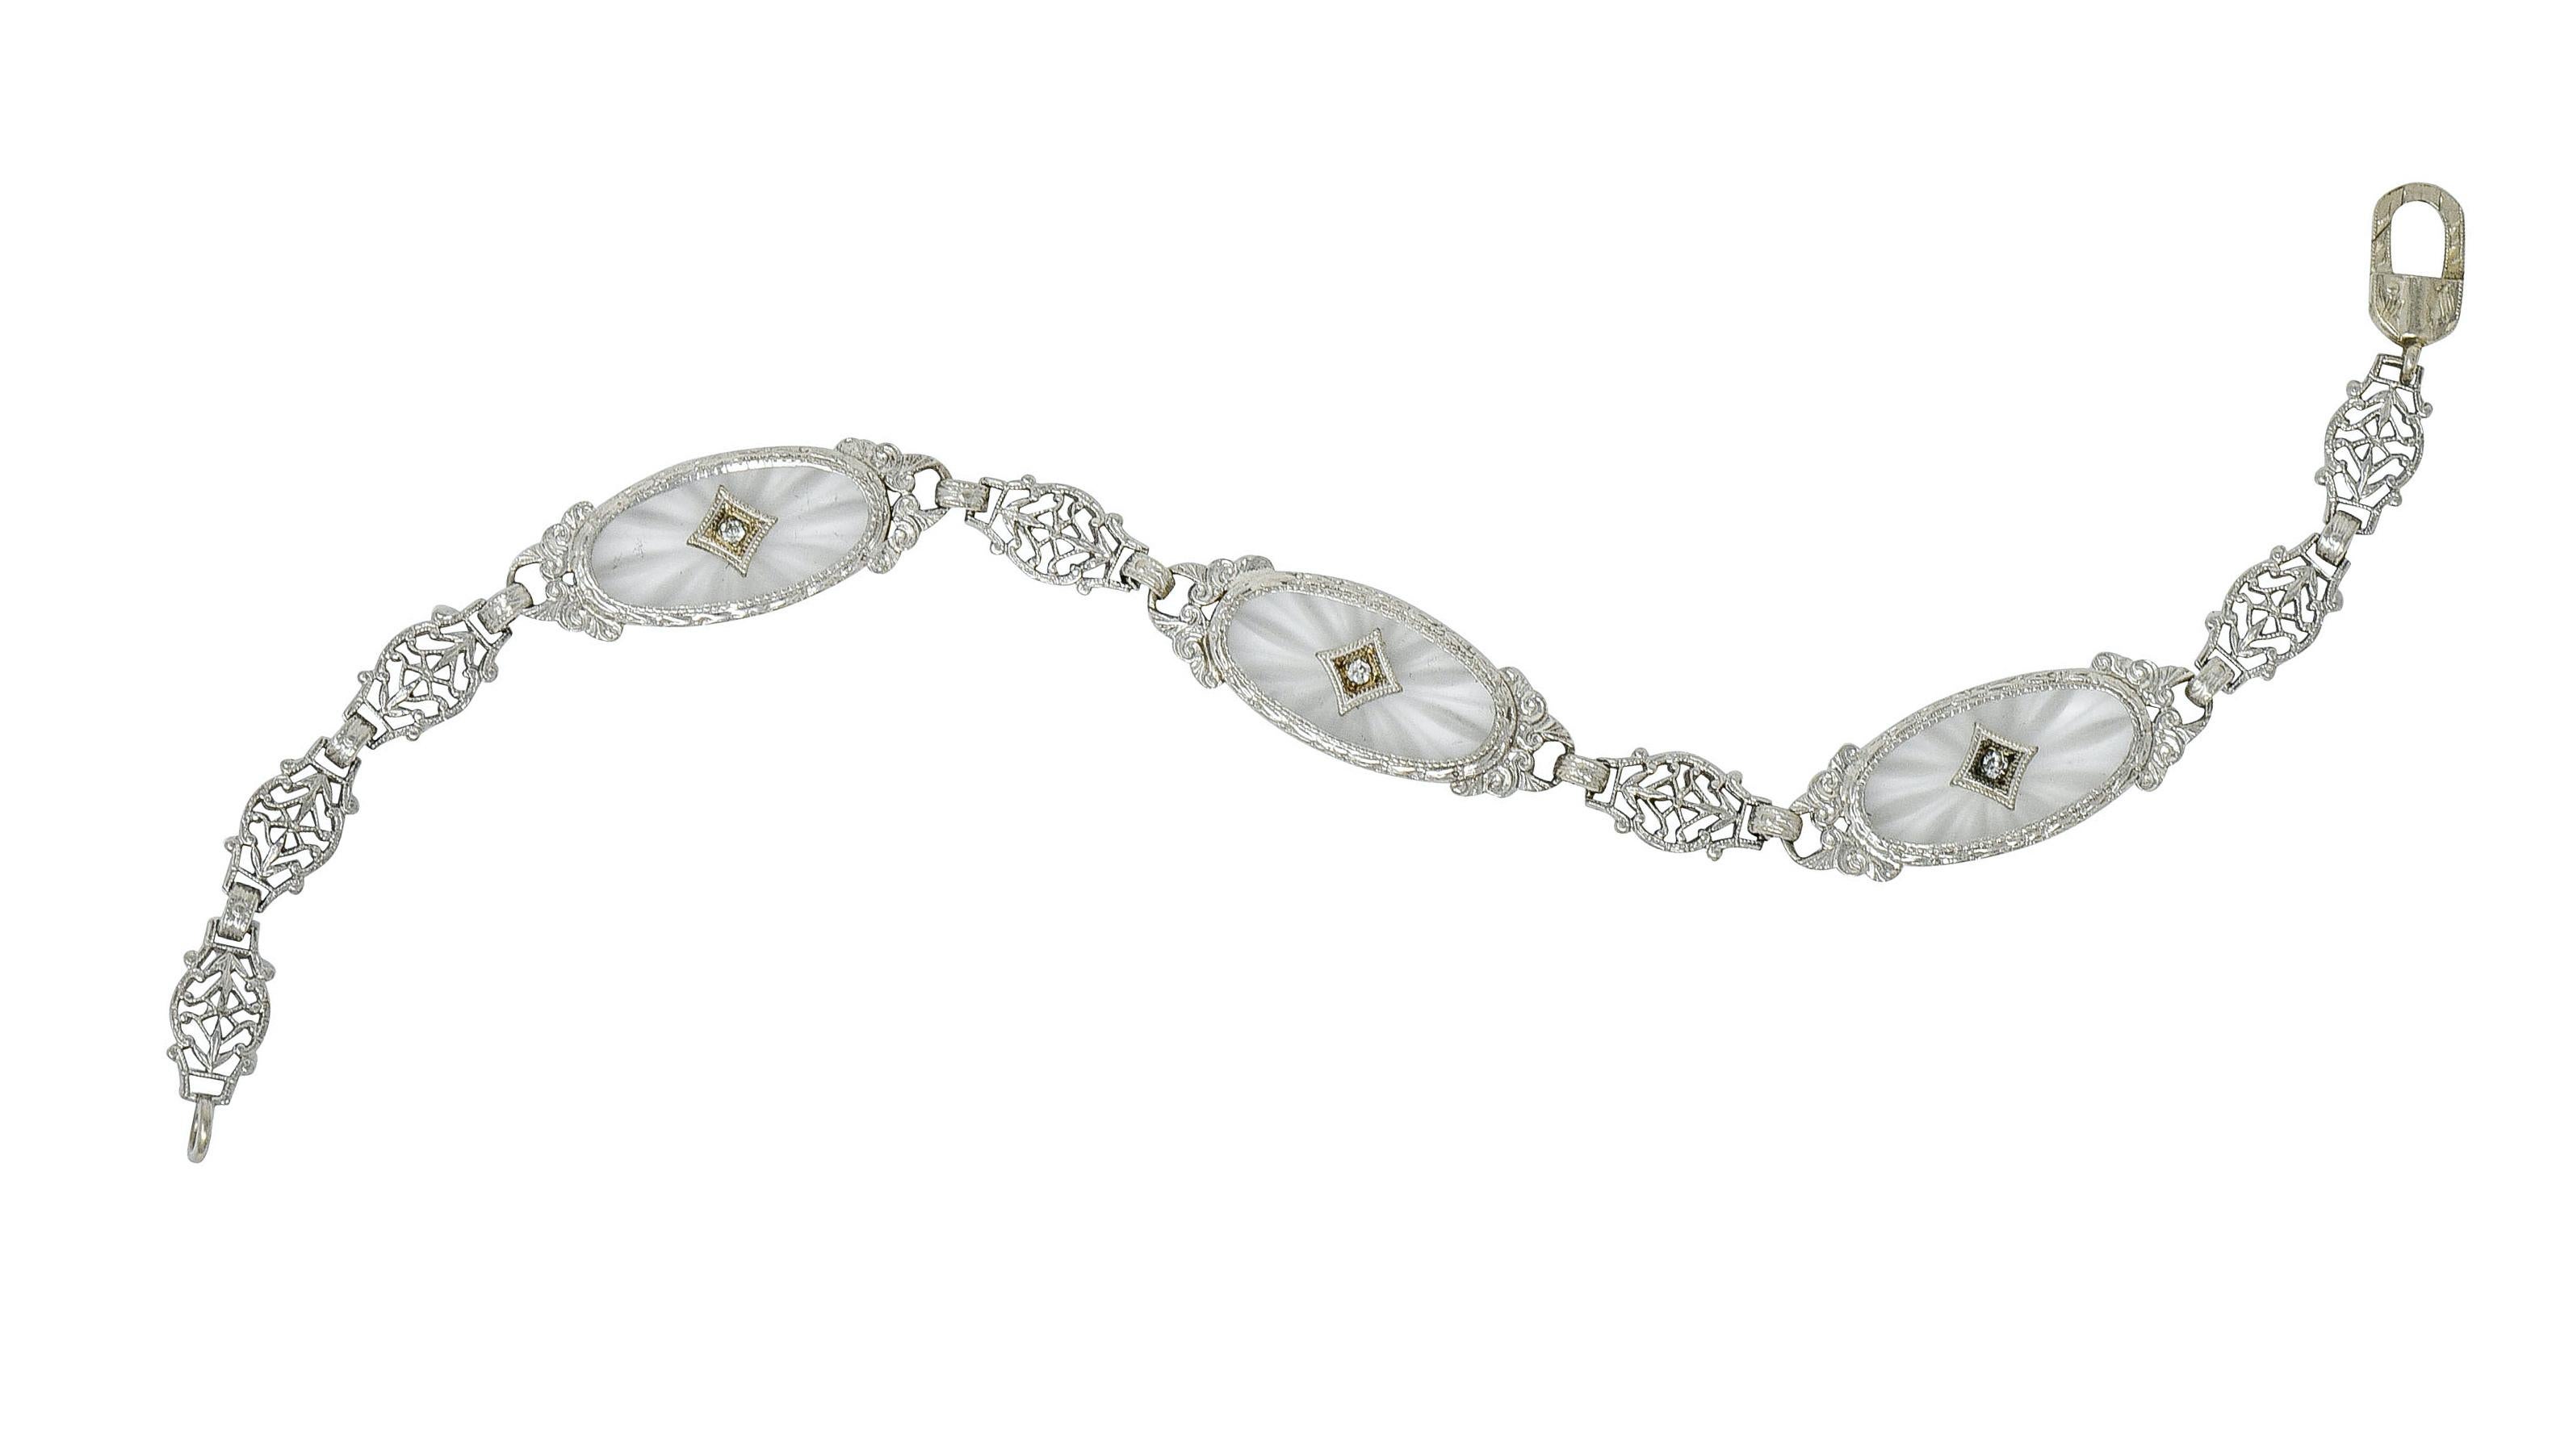 Link style bracelet features three oval tablets of camphor glass measuring approximately 7.5 x 16.5 mm; frosted with a radiating pattern

Each oval centers a milgrain navette form set with a single cut diamond, weighing in total approximately 0.08